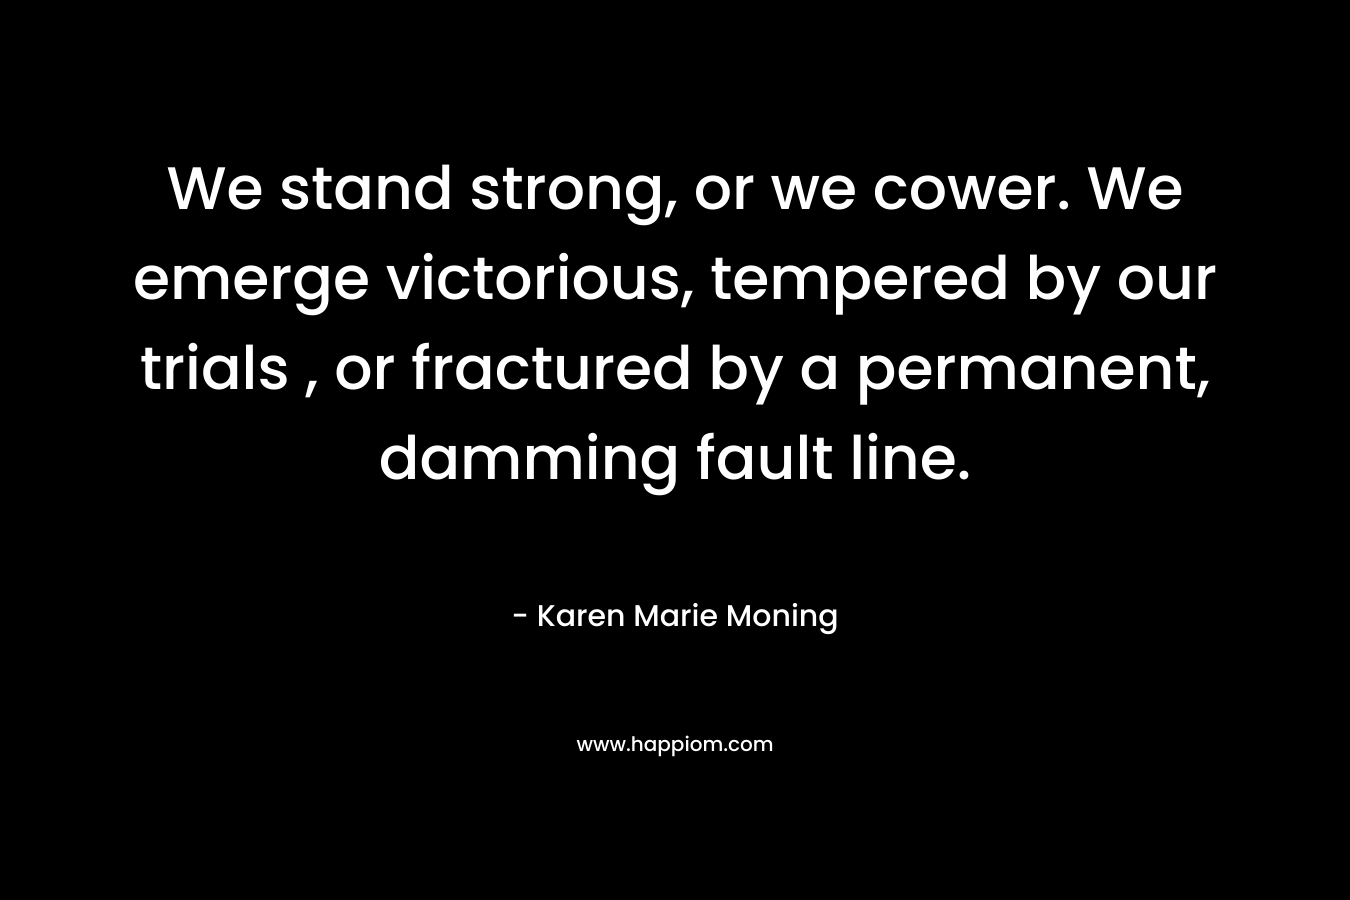 We stand strong, or we cower. We emerge victorious, tempered by our trials , or fractured by a permanent, damming fault line.